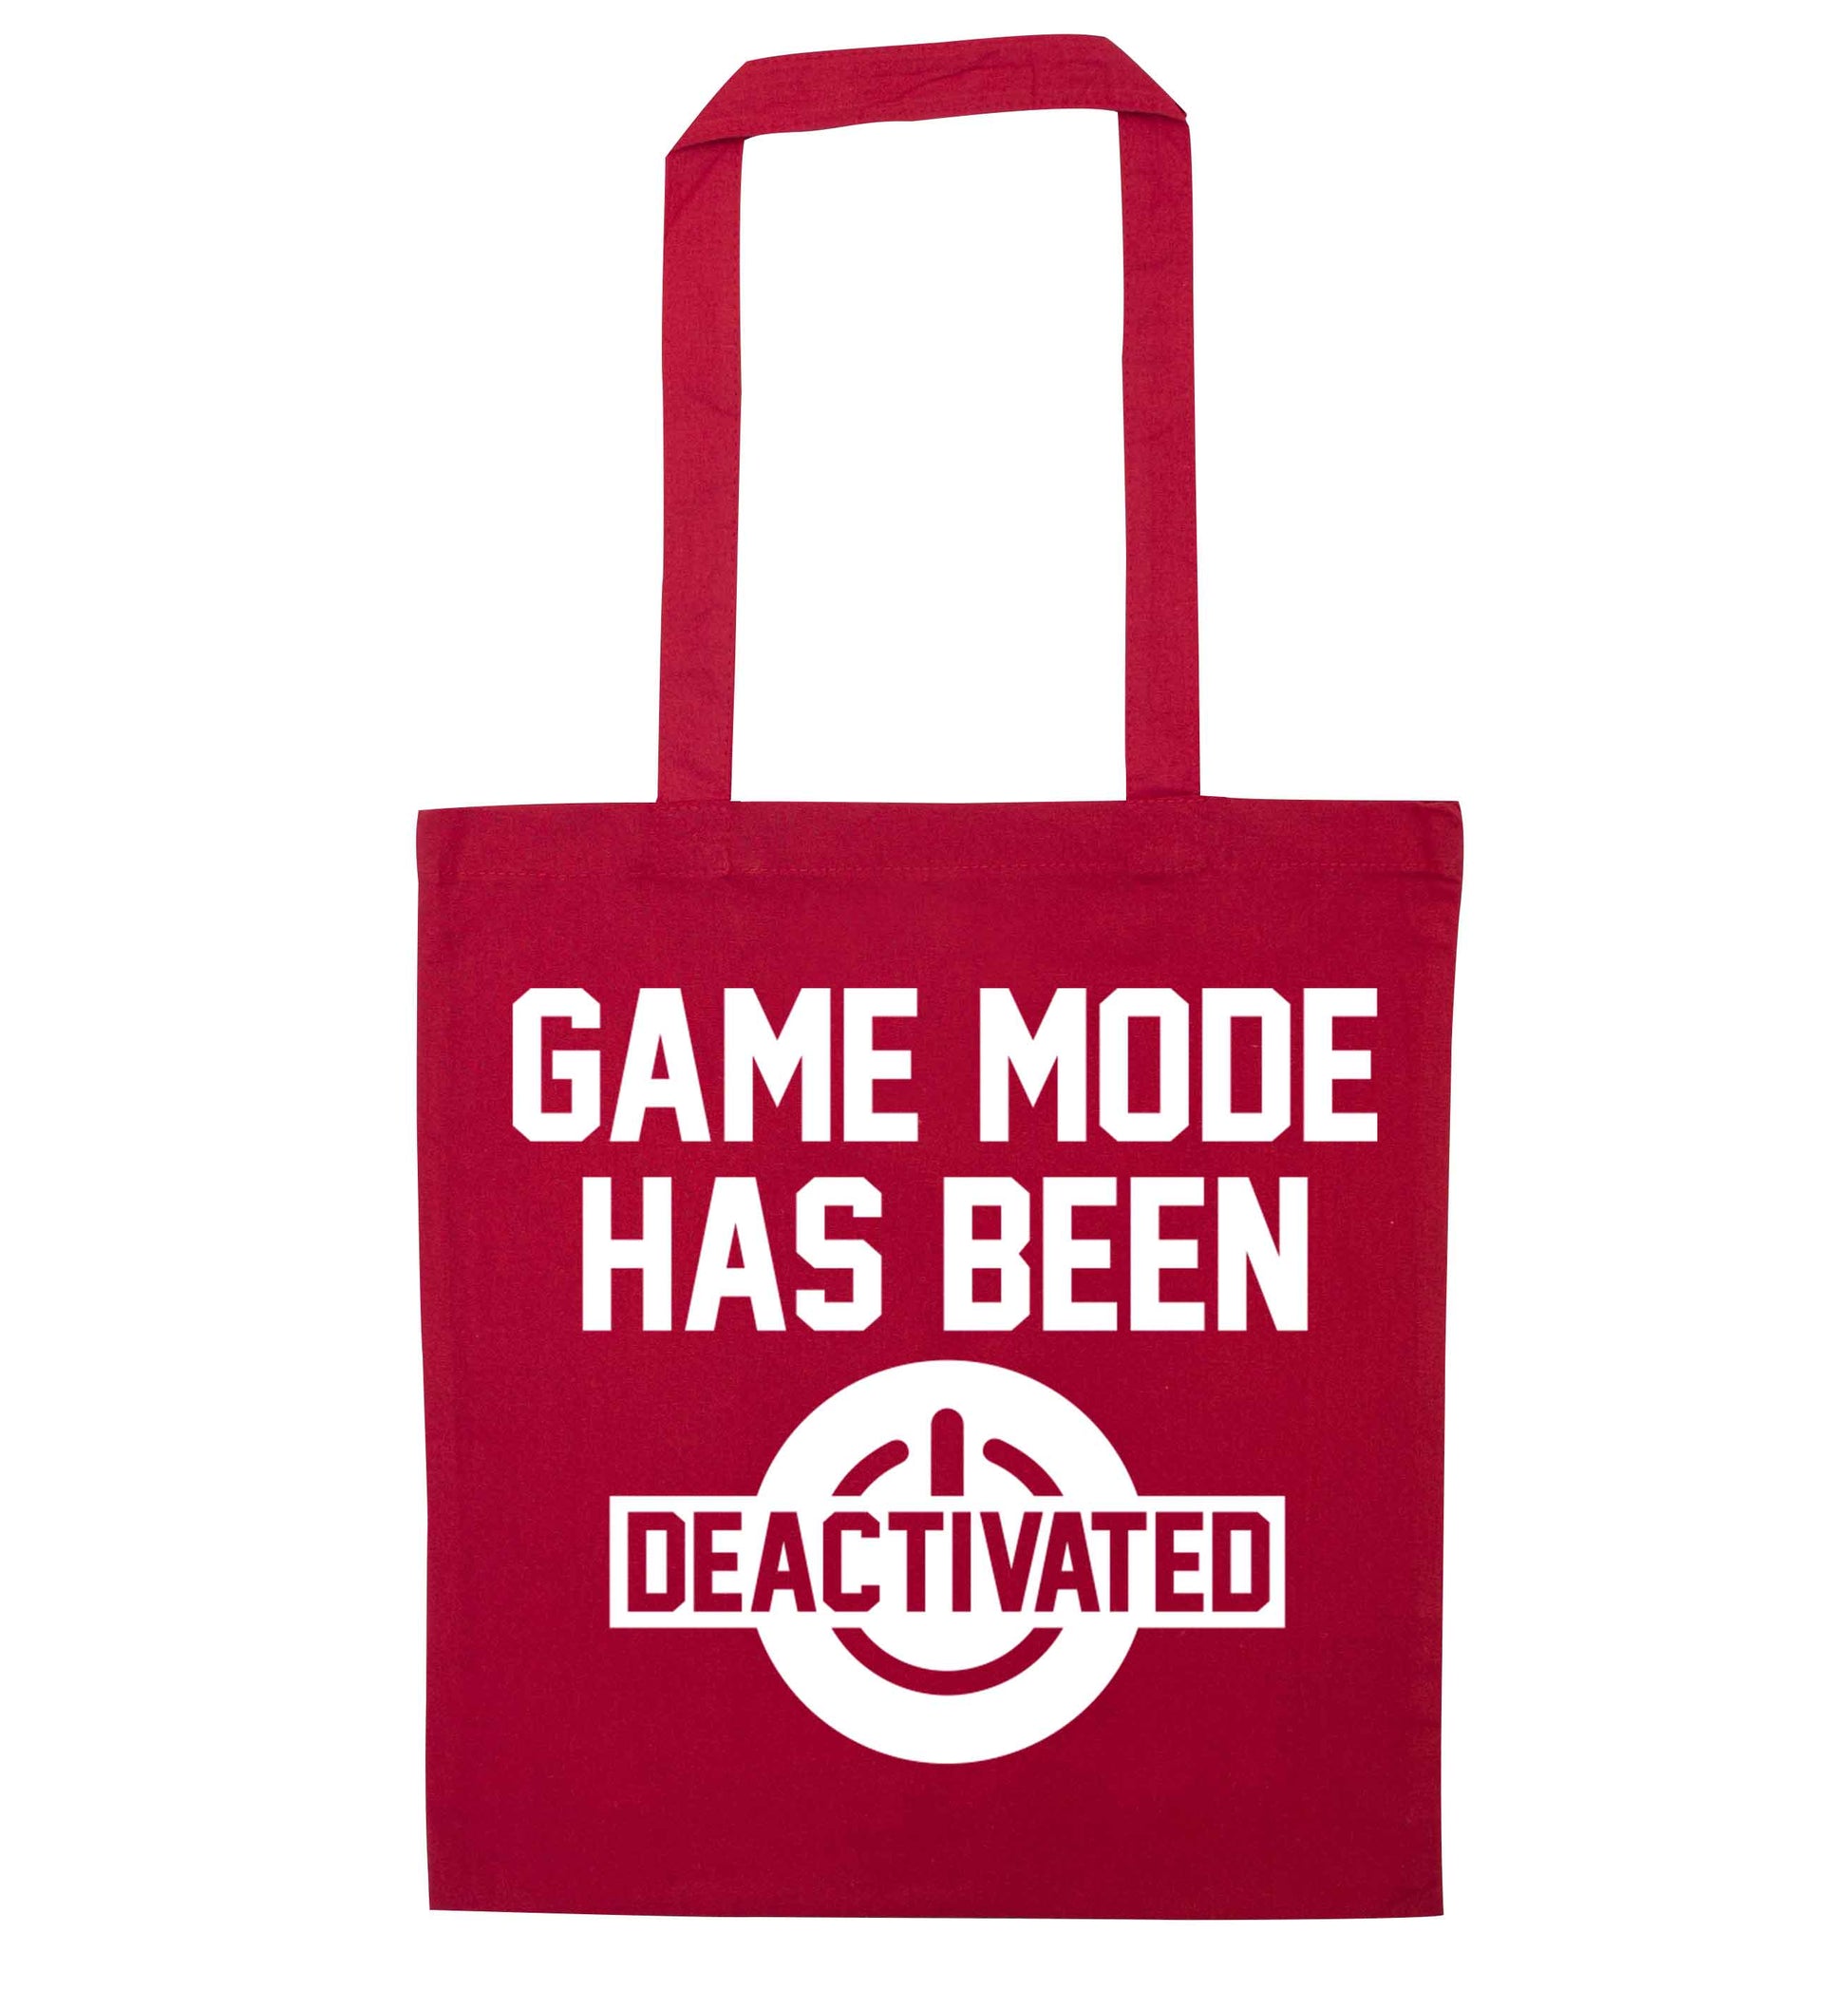 Game Mode Has Been Deactivated red tote bag